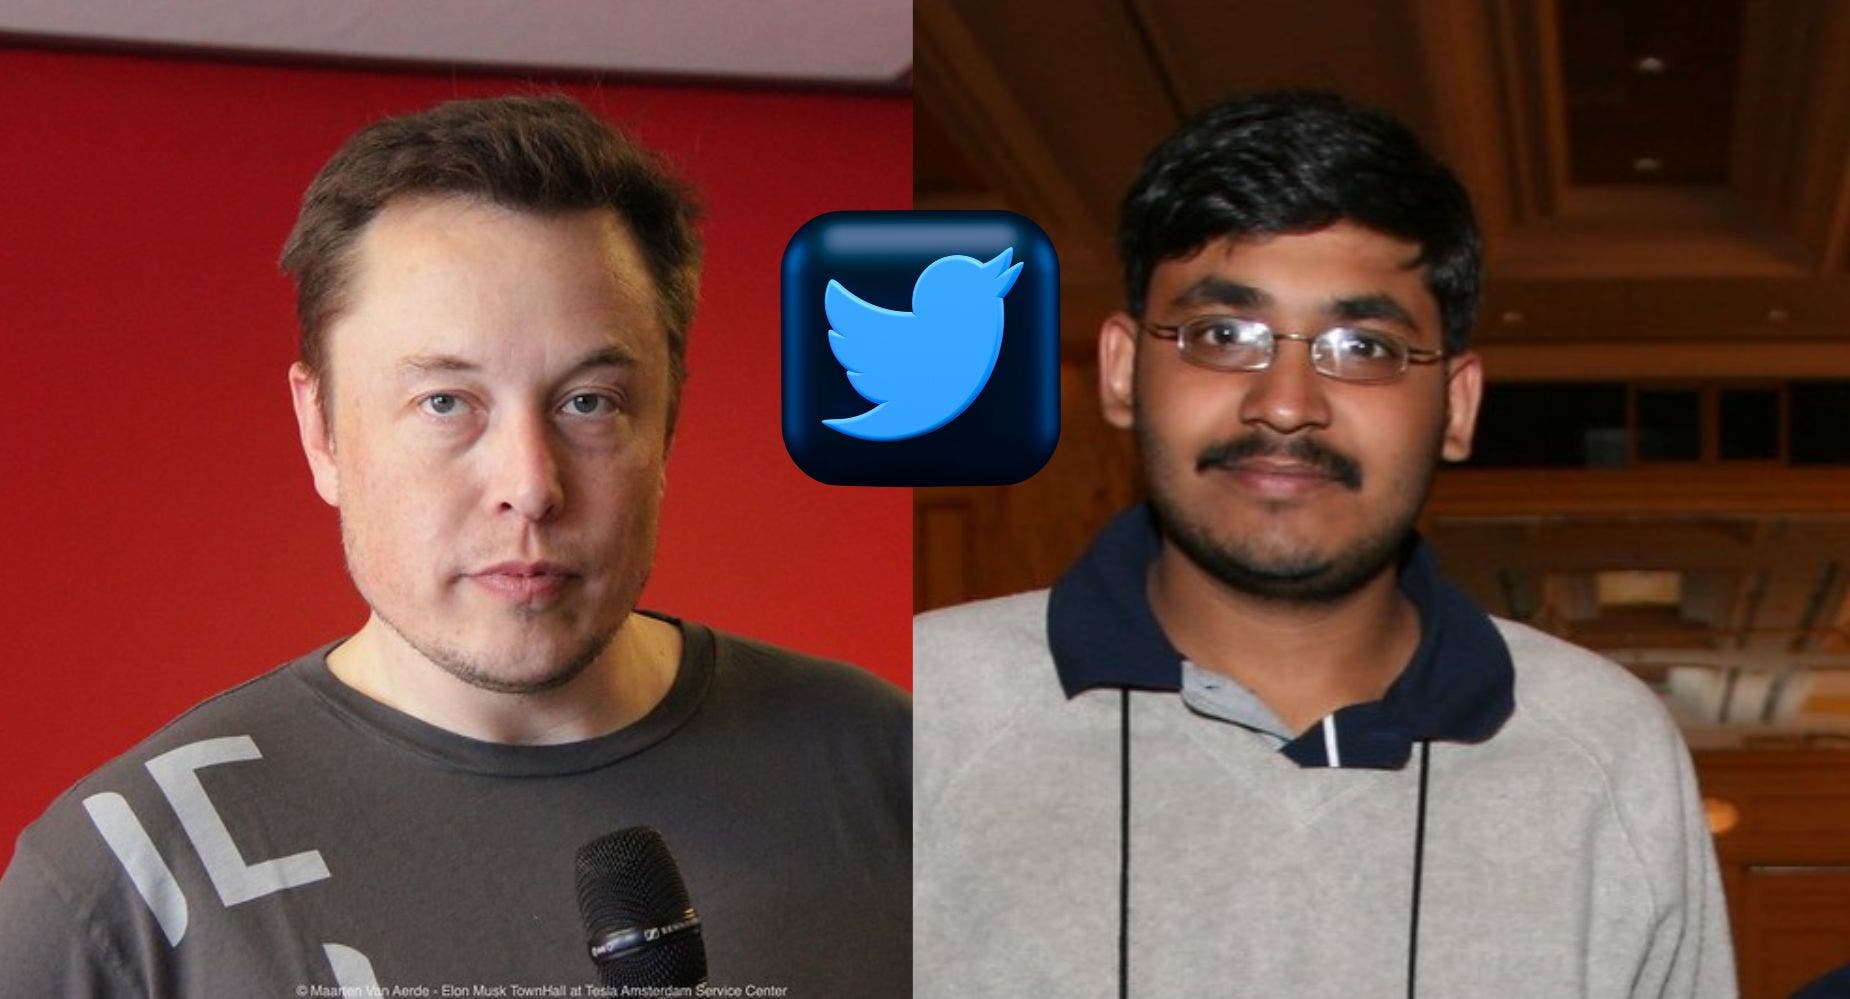 Elon Musk Challenges Twitter CEO Parag Agrawal To Public Debate On Bot Count, Runs Poll On His Claims